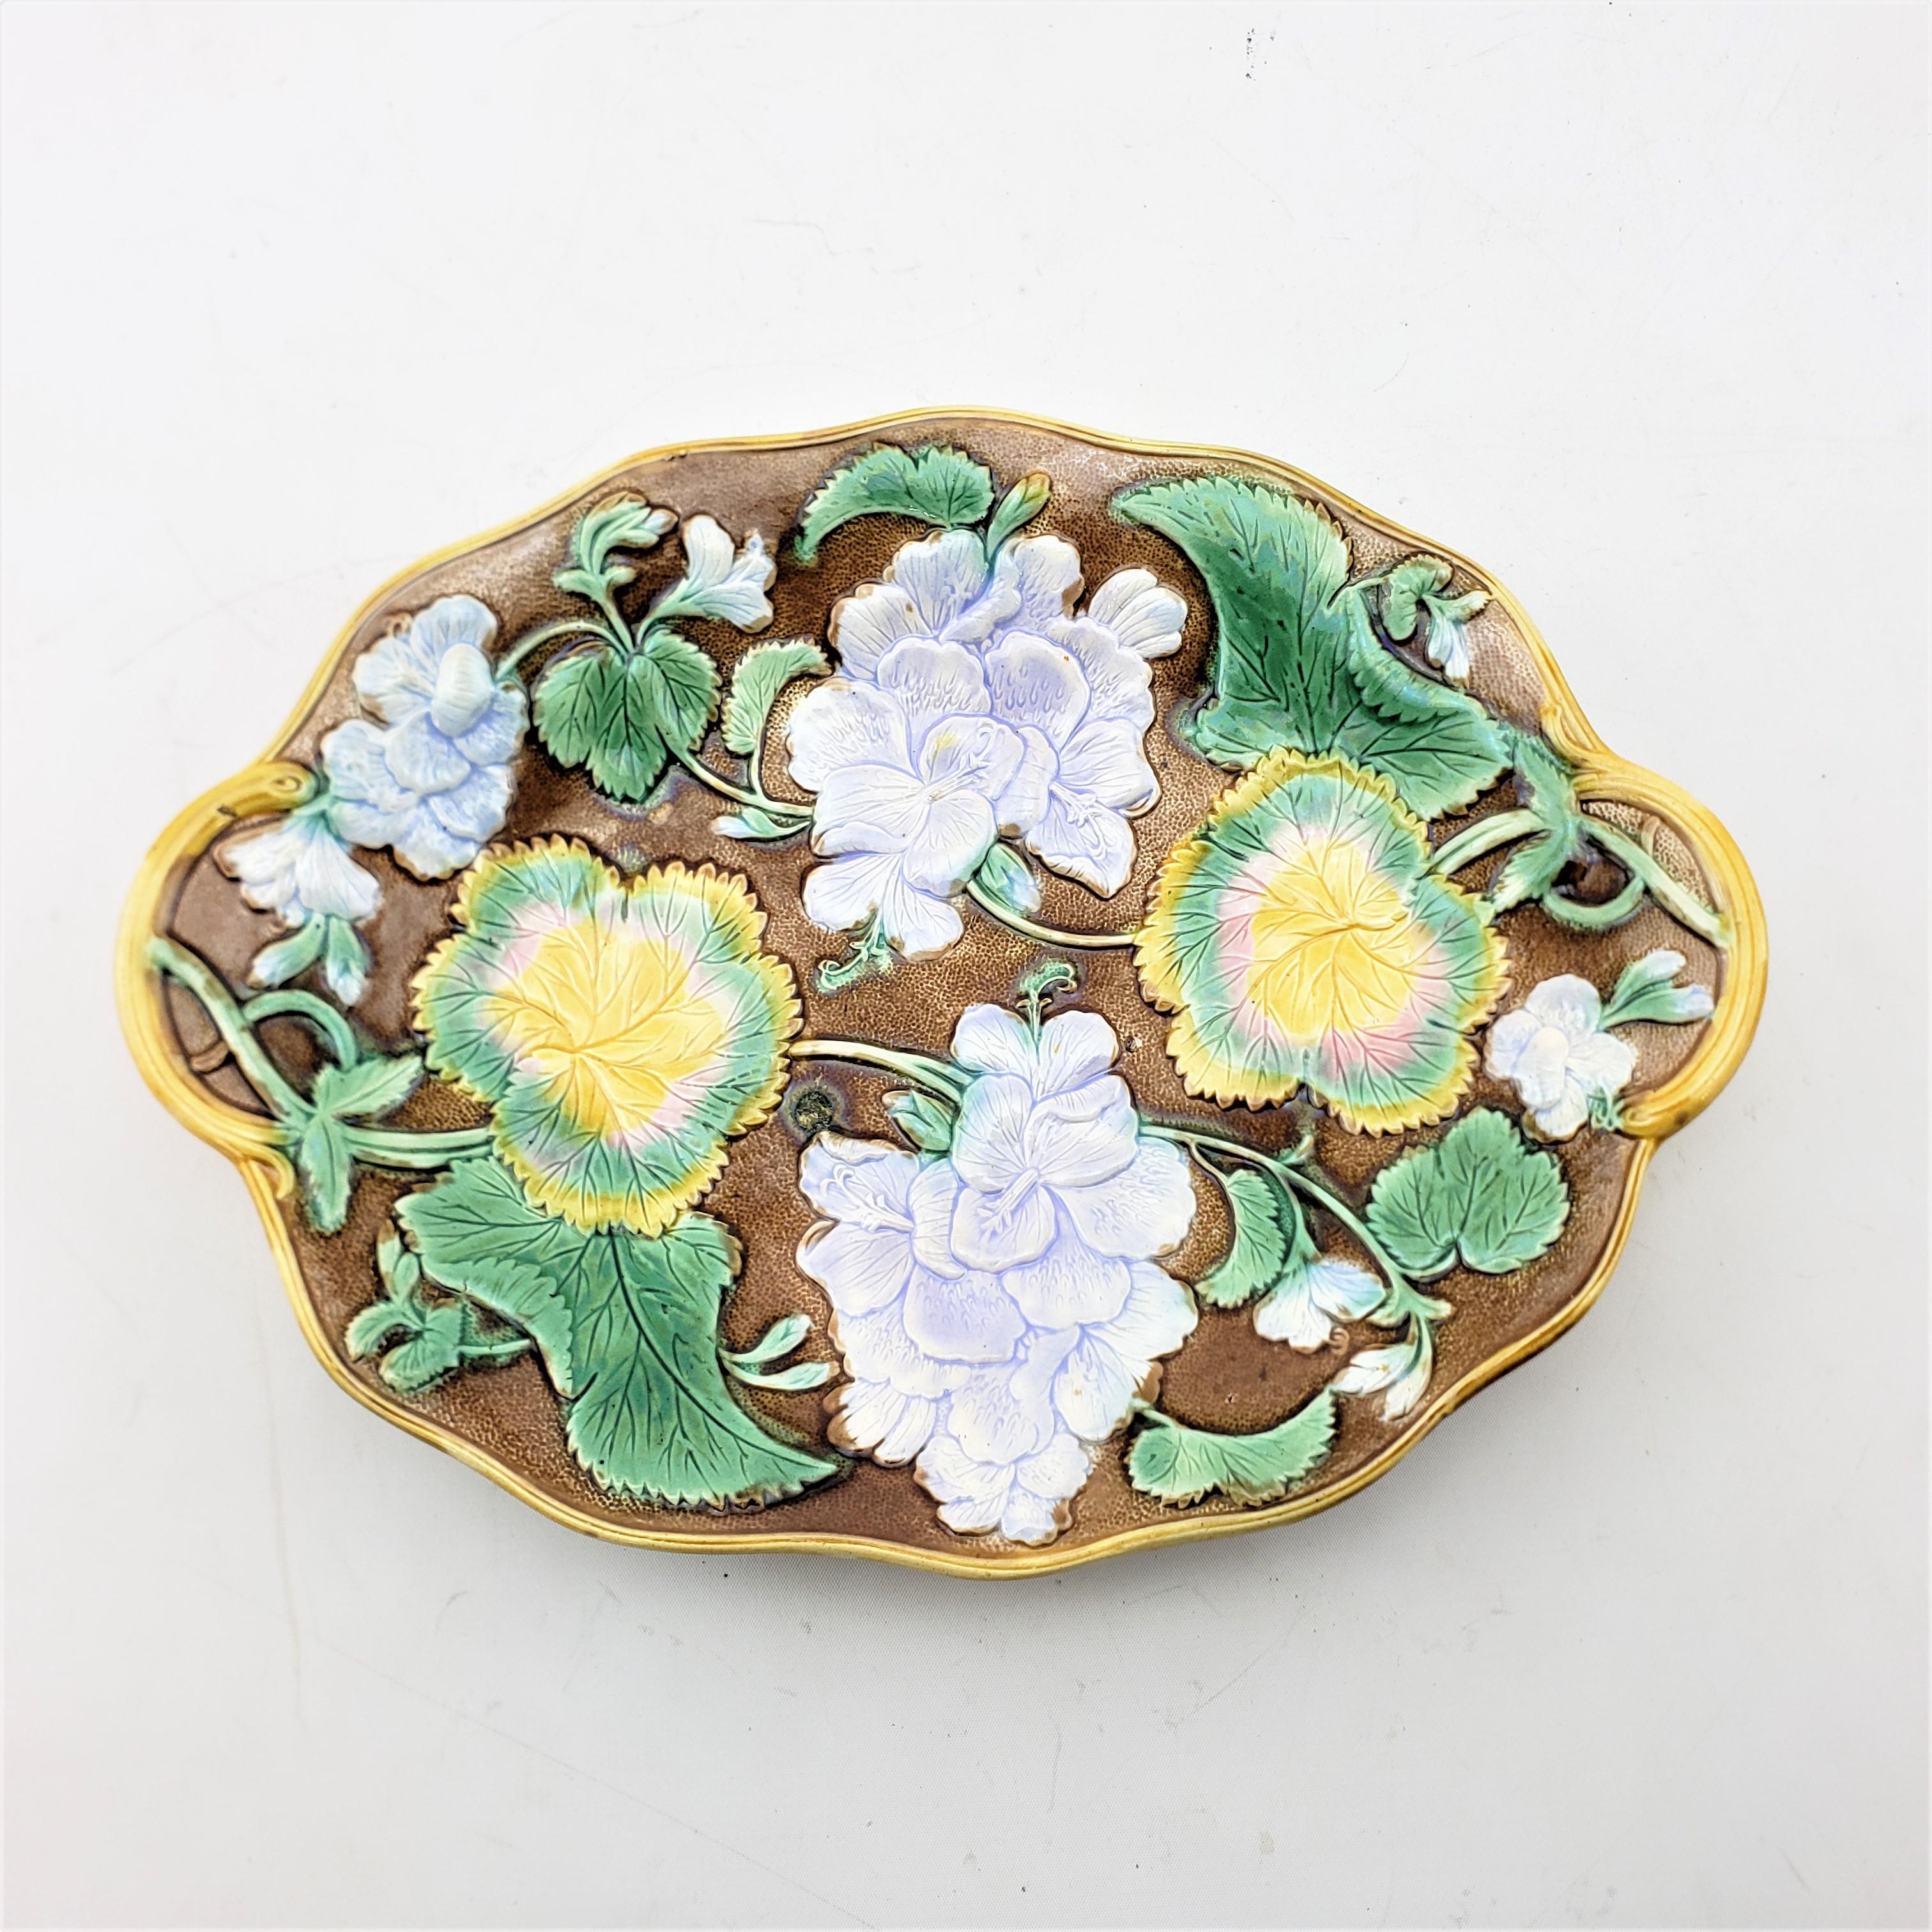 Small Antique Majolica Serving Dish or Platter with Leaf & Flower Decoration For Sale 2